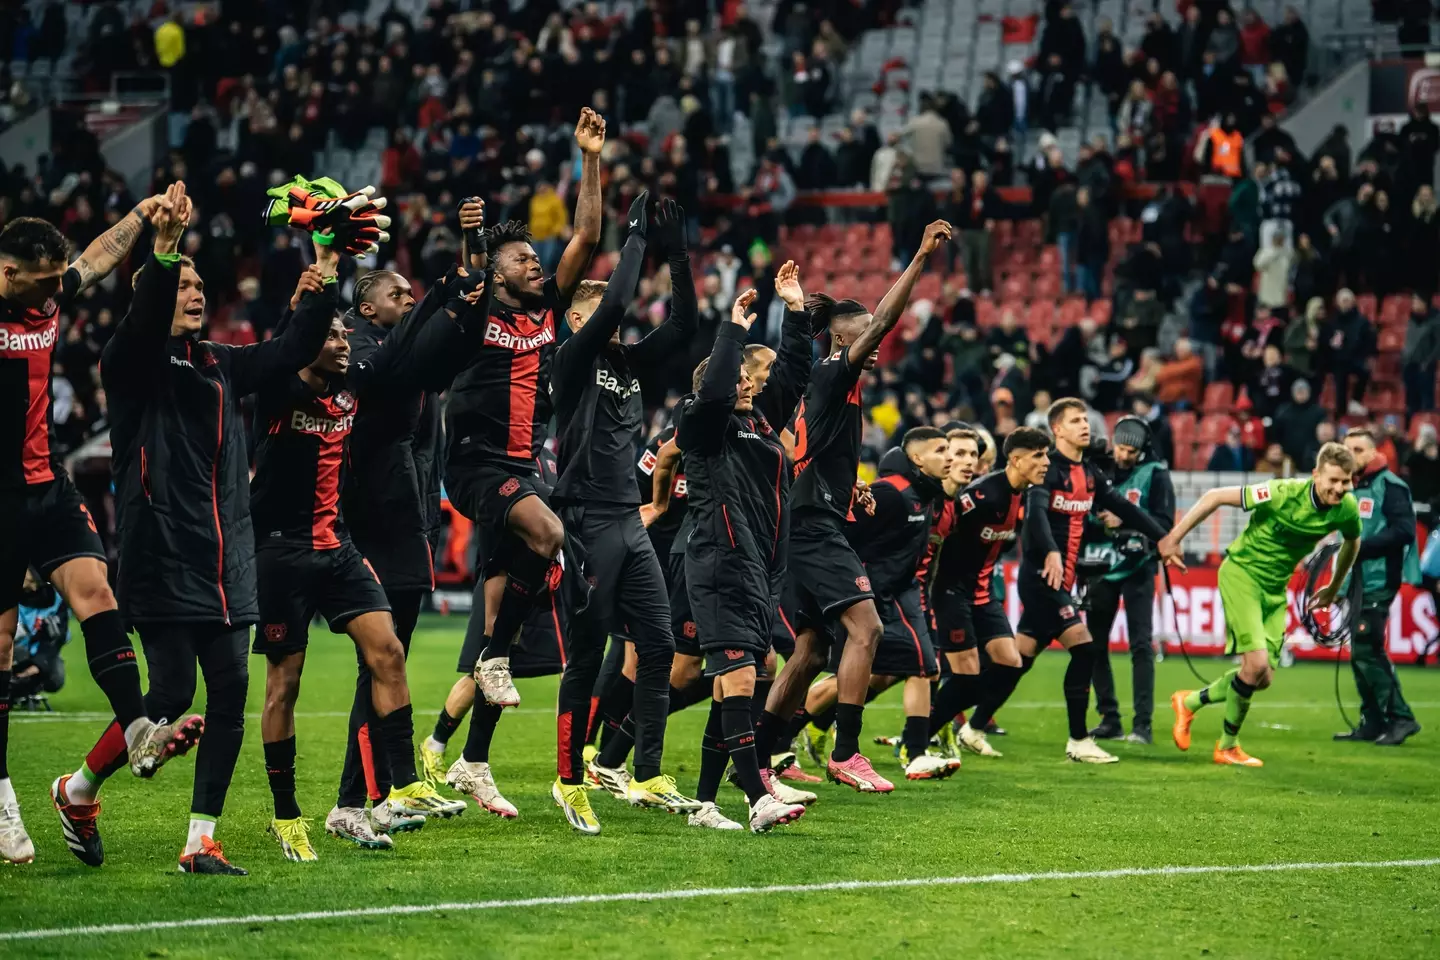 Bayer Leverkusen are 11 points clear at the top of the Bundesliga. (